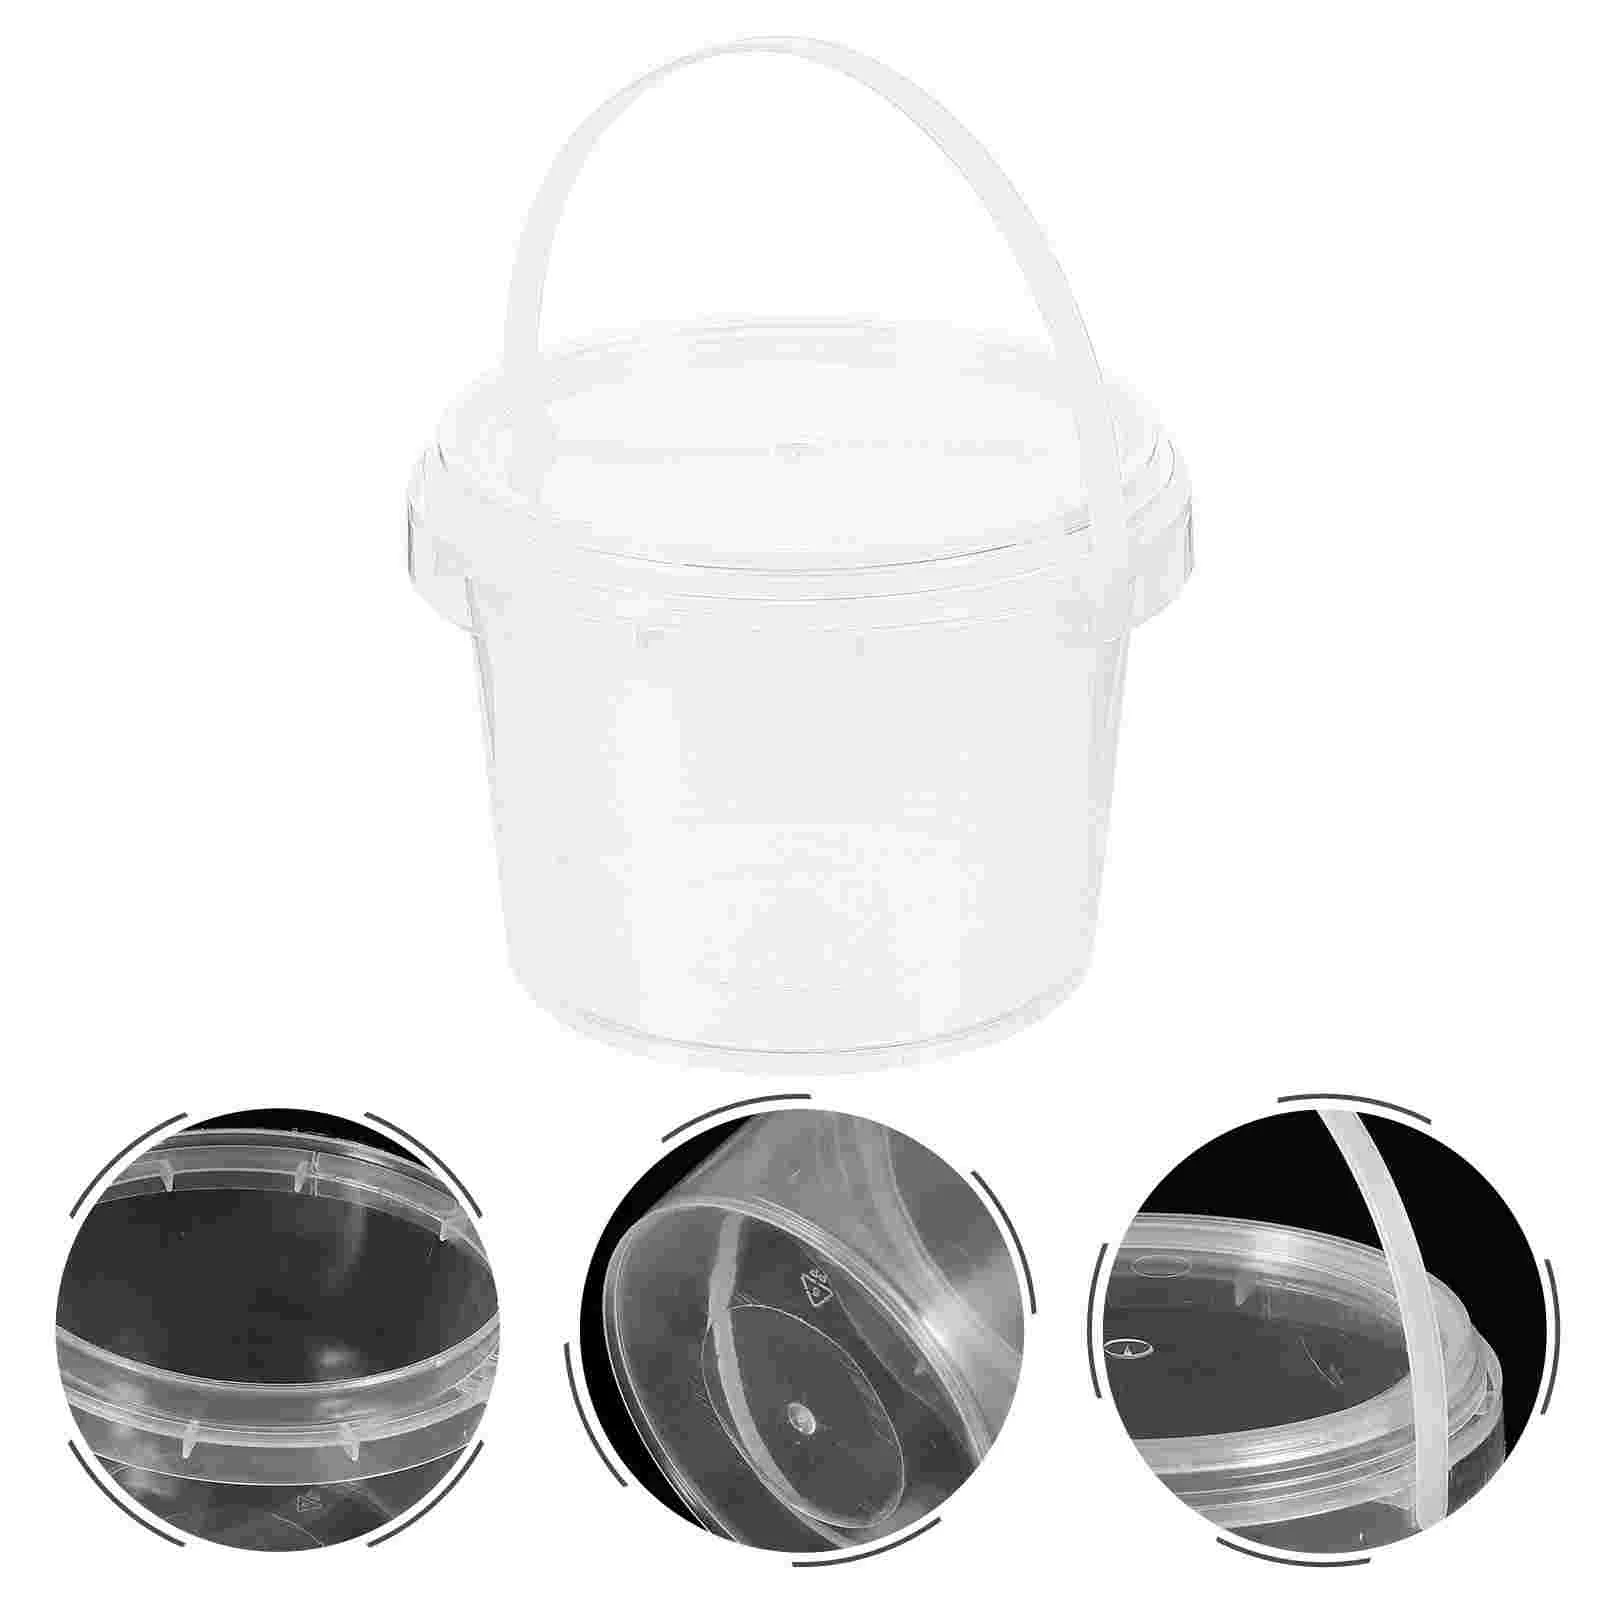 

10 Pcs Transparent Small Barrel Round Container Lid Sealing Food Bucket Sealed Storage Buckets Clear Pp Dustproof Empty